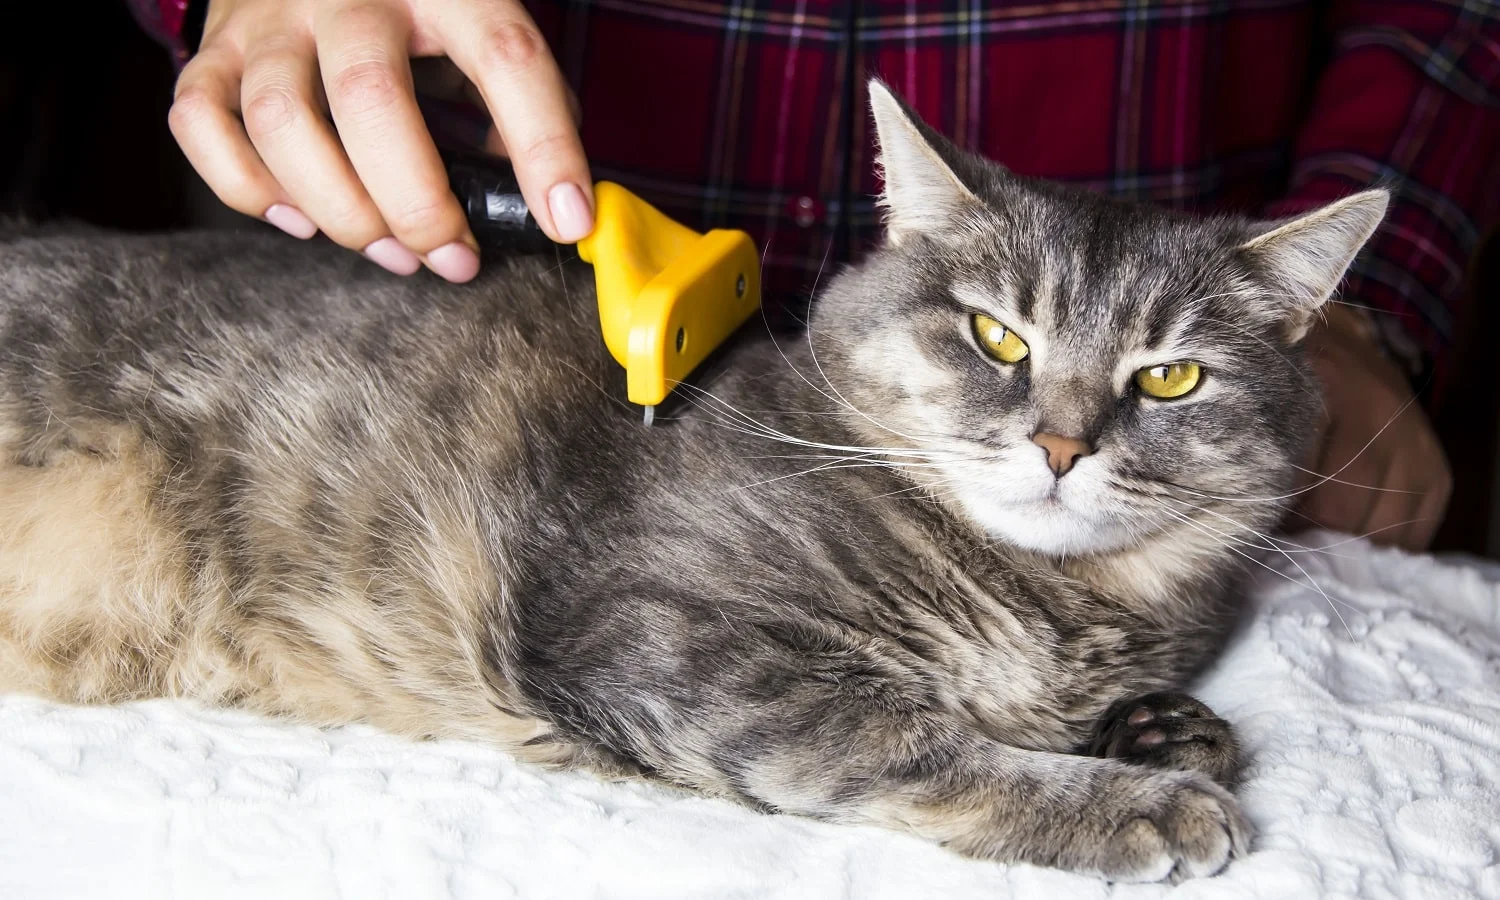 A woman combs her gray cat with a torch to get rid of excess wool. Caring for pets